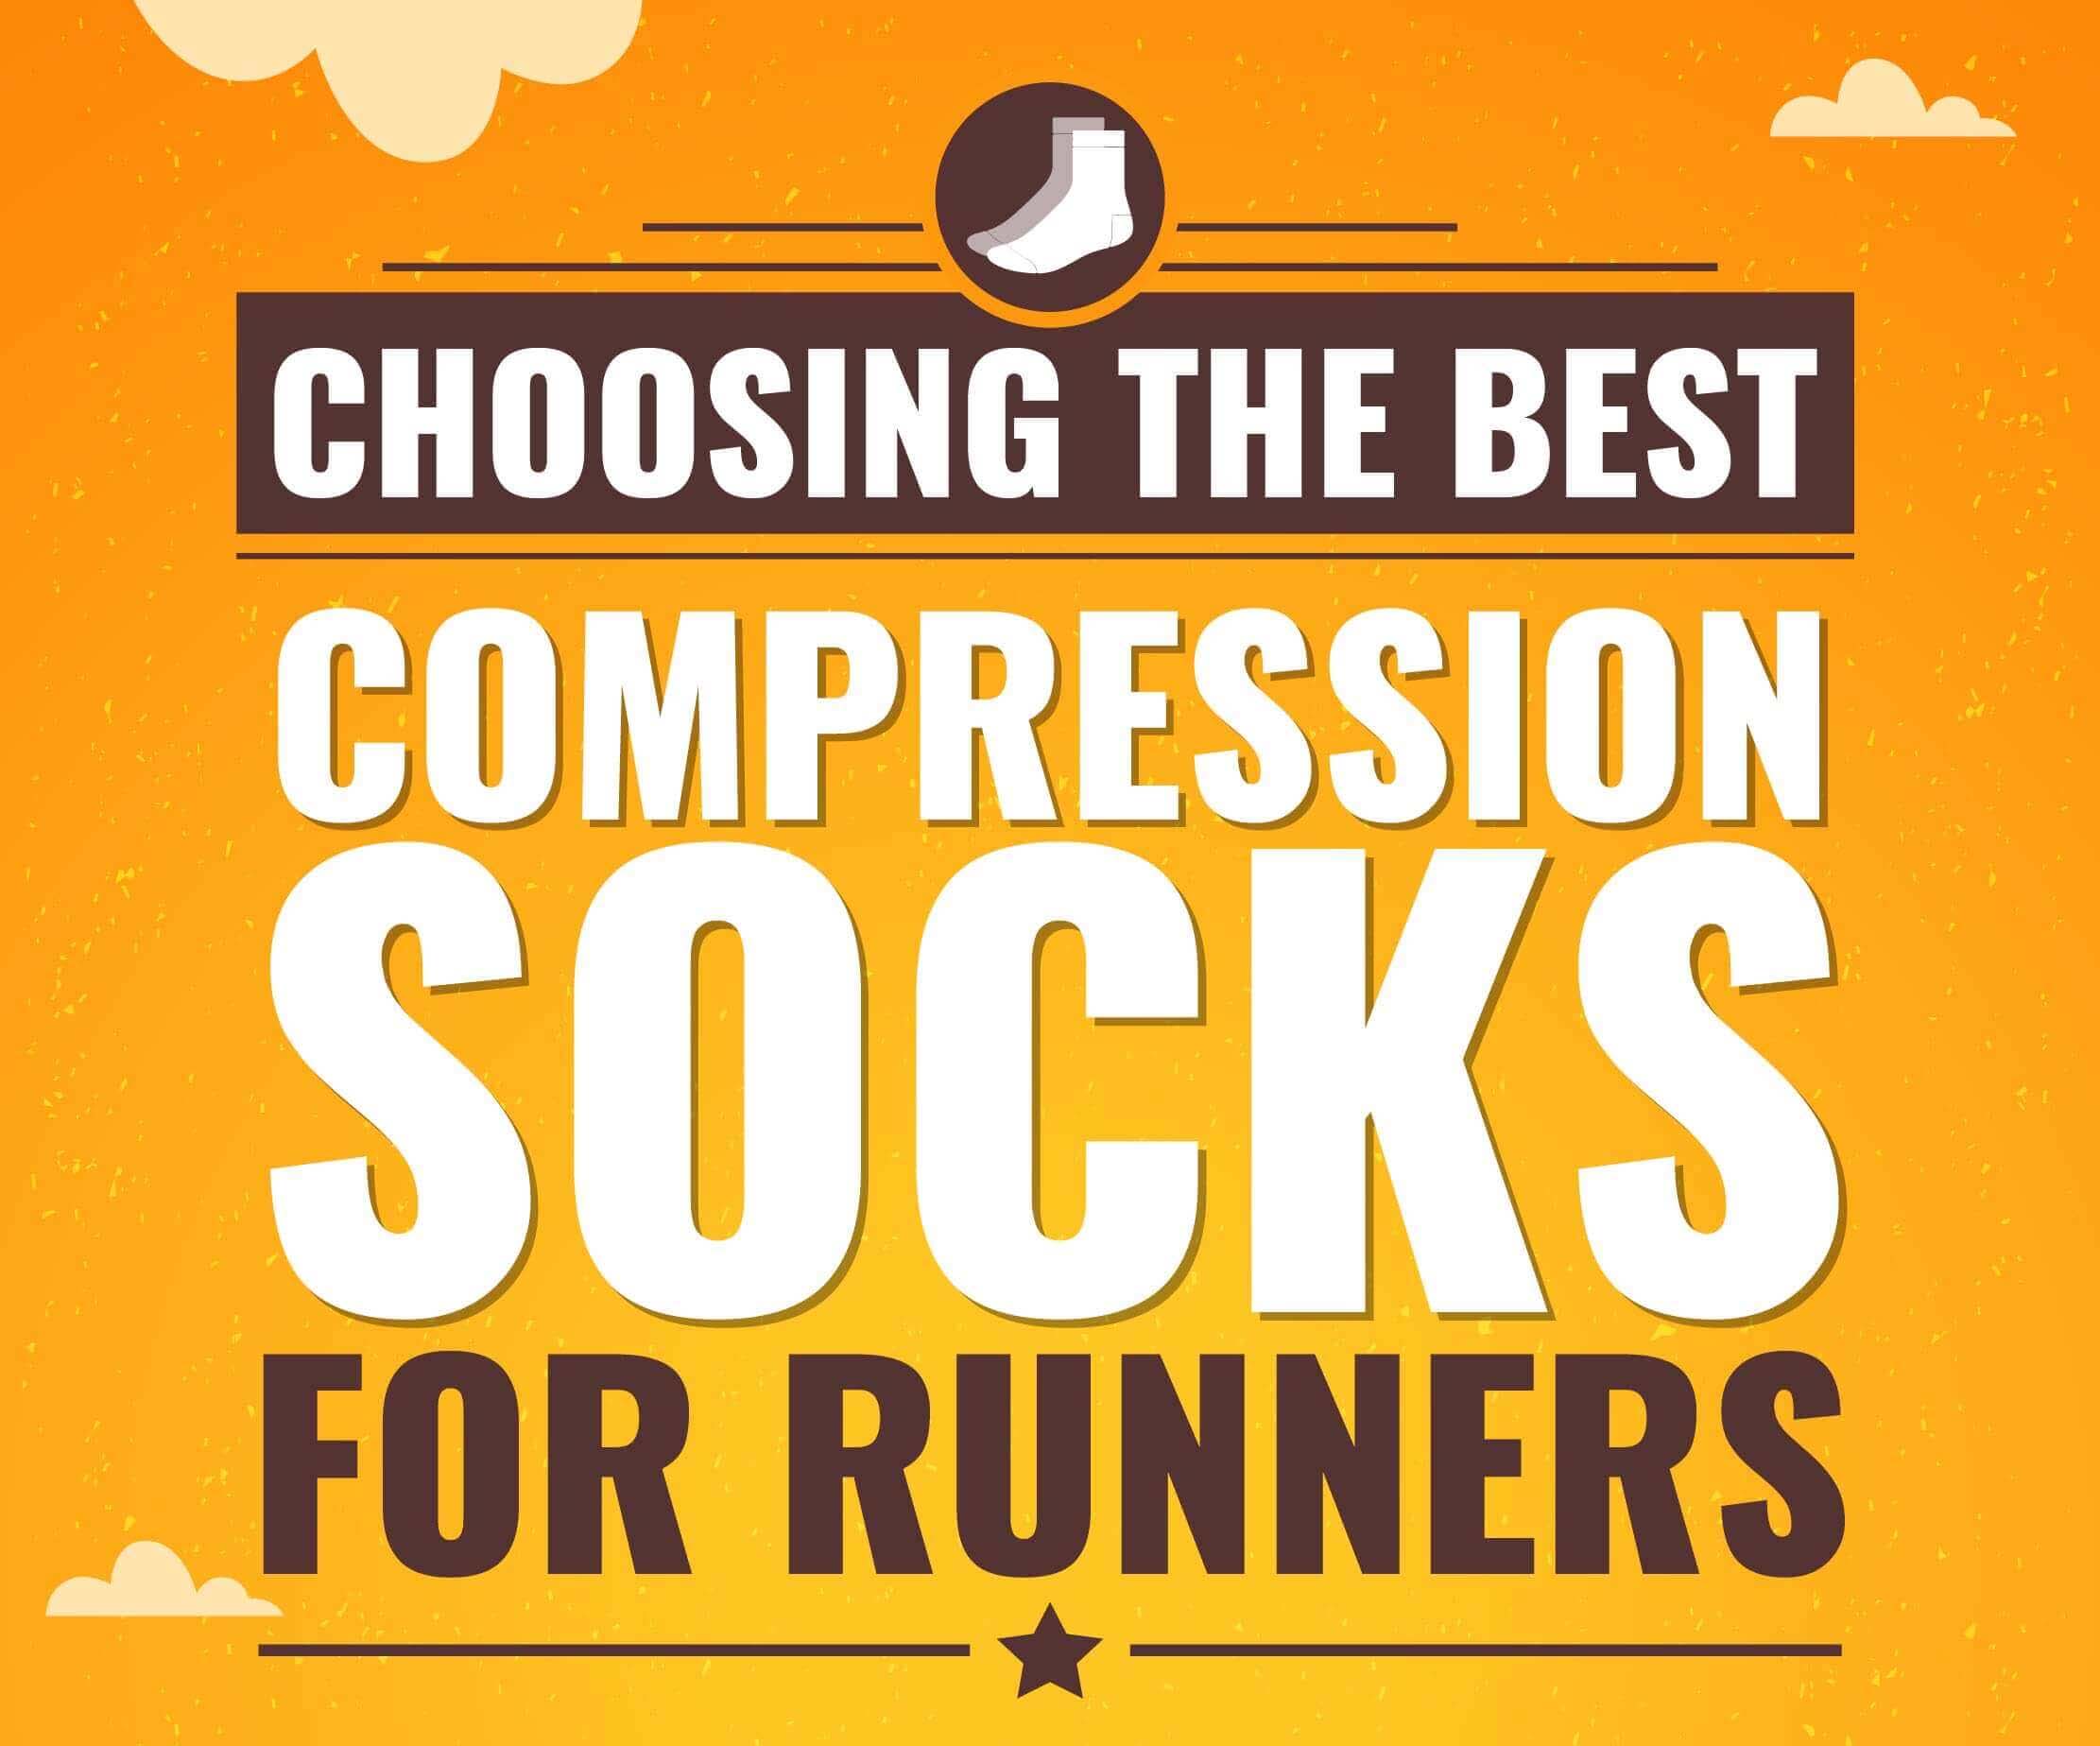 The Best Compression Socks for Runners